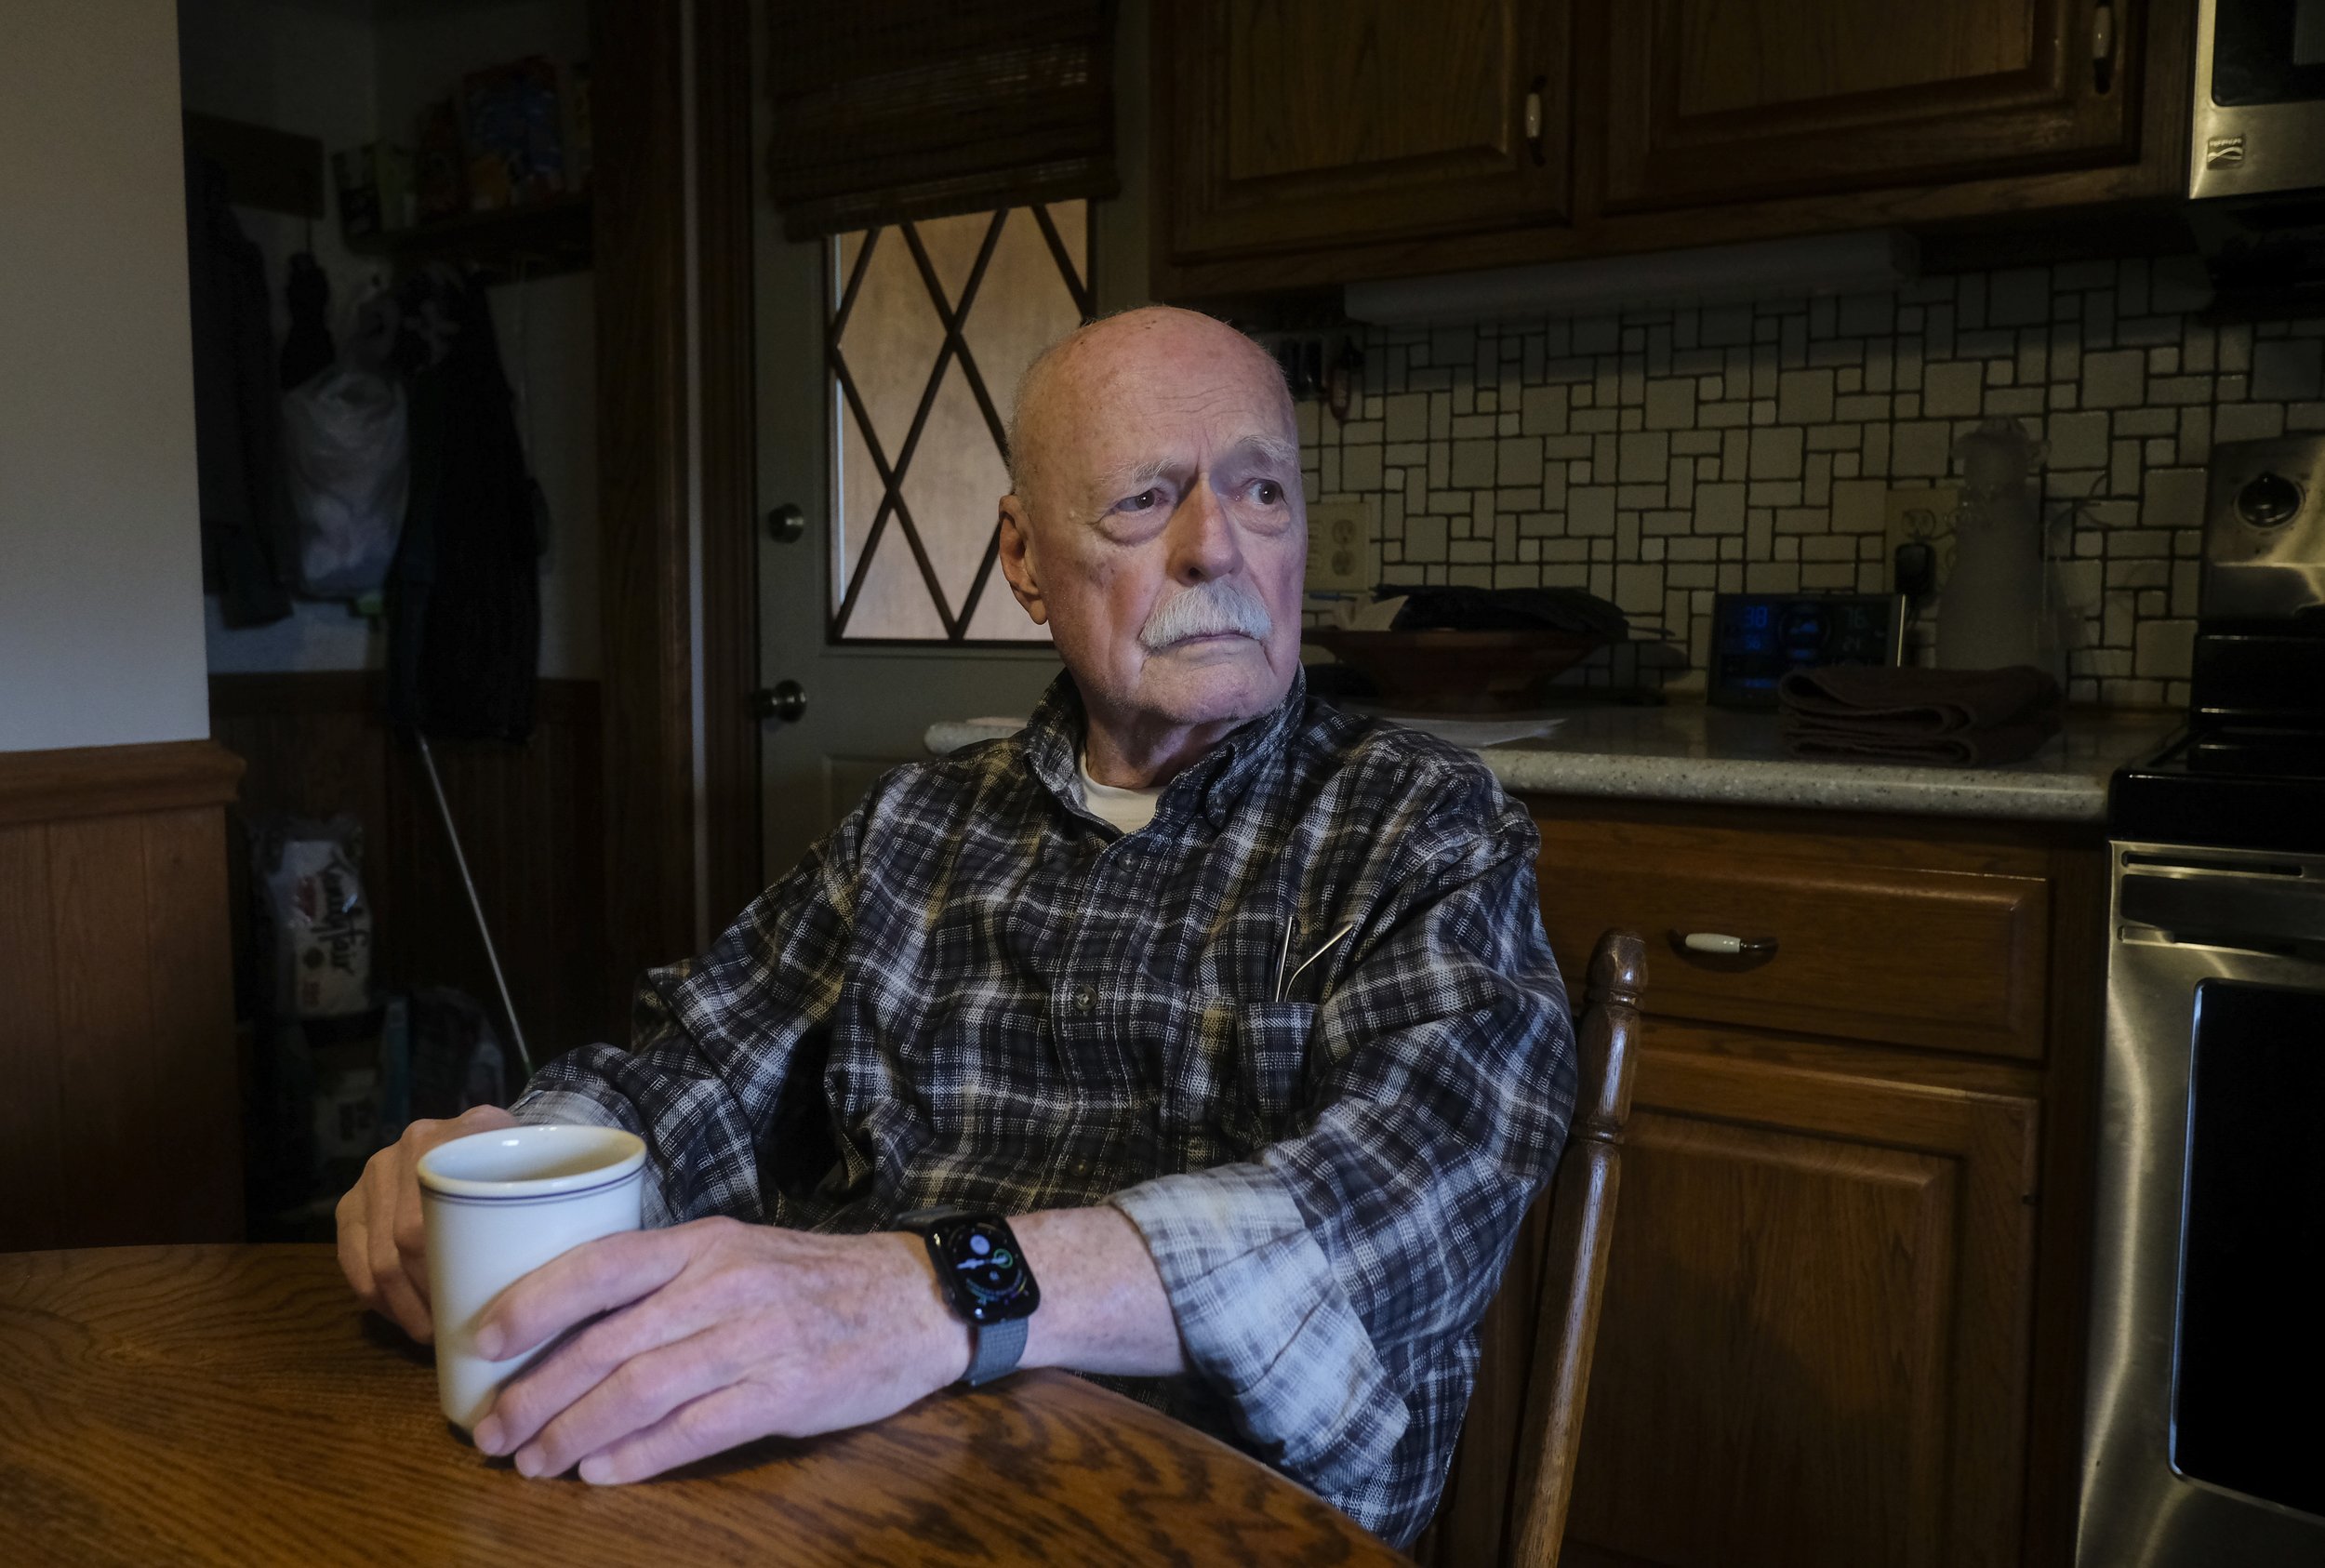  Charlie Hutchens poses for a portrait at his home in East Palestine on Saturday, February 18, 2023. Charlie was one of hundreds off residents on the Eastern side of town who were forced to evacuate after a Norfolk Southern train carrying toxic chemi